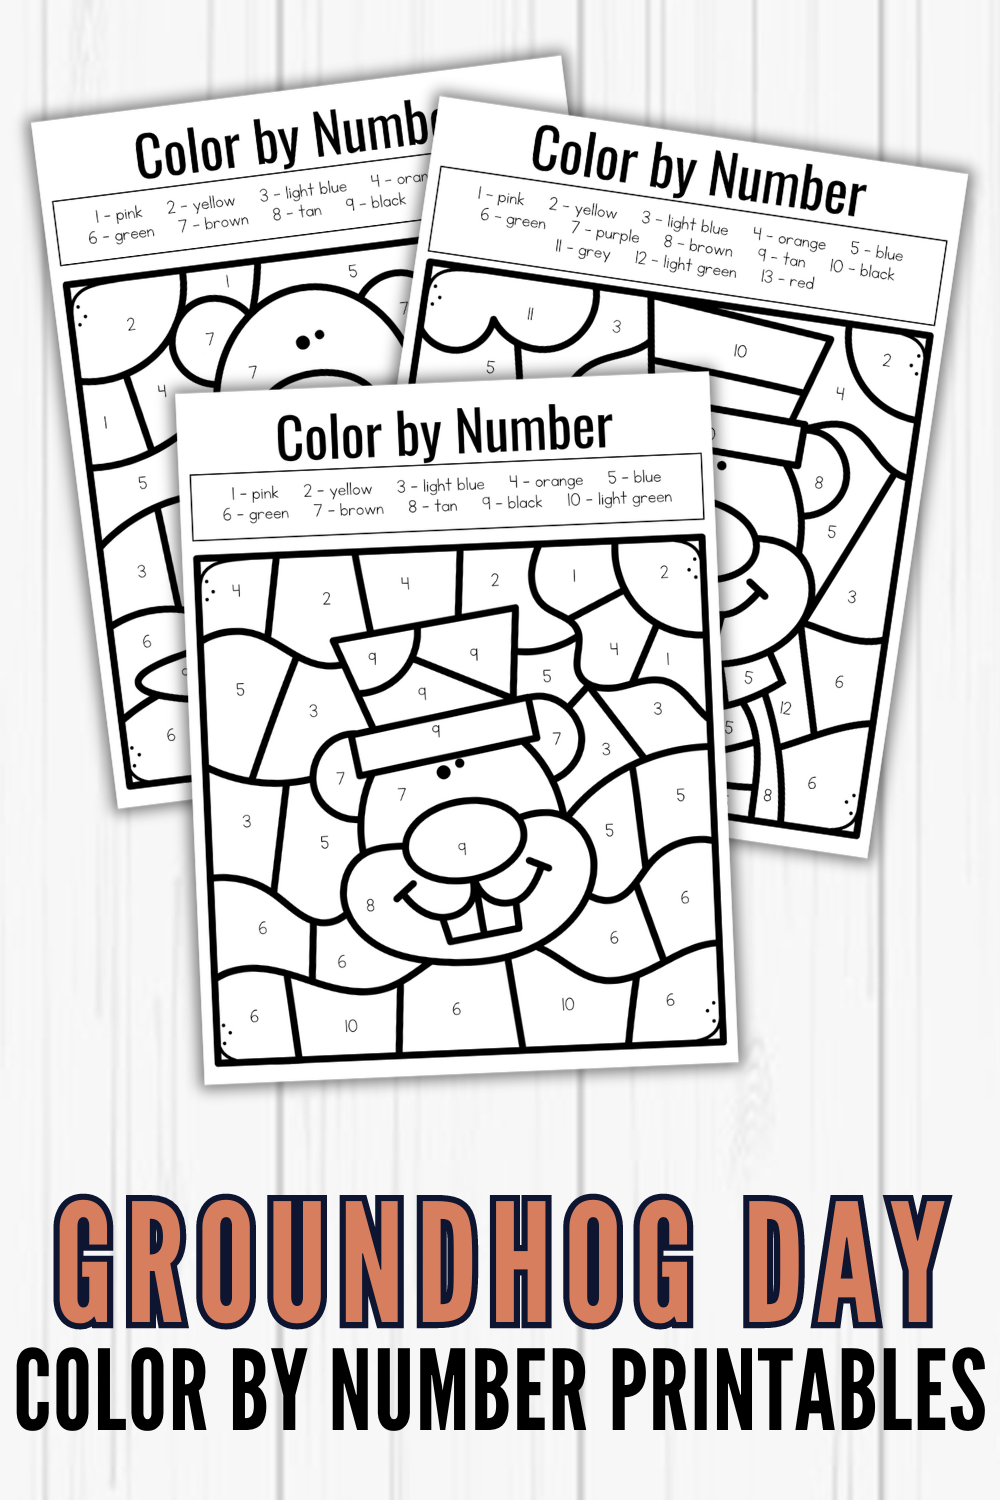 free-printable-groundhog-day-coloring-pages Groundhog Day Color by Number